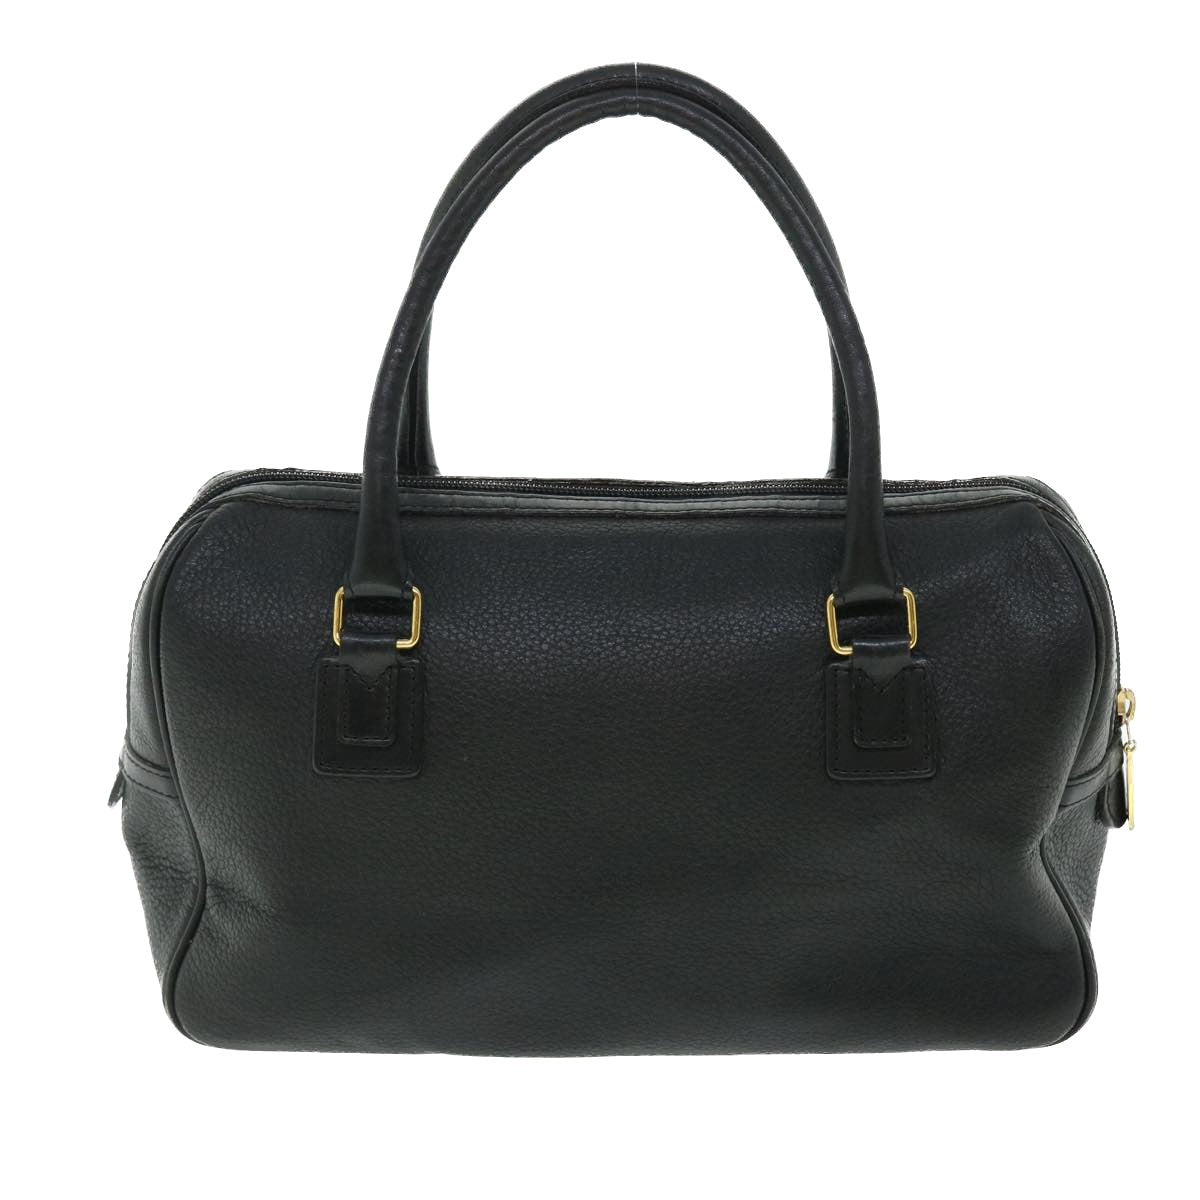 Burberrys Hand Bag Leather Black Auth bs7653